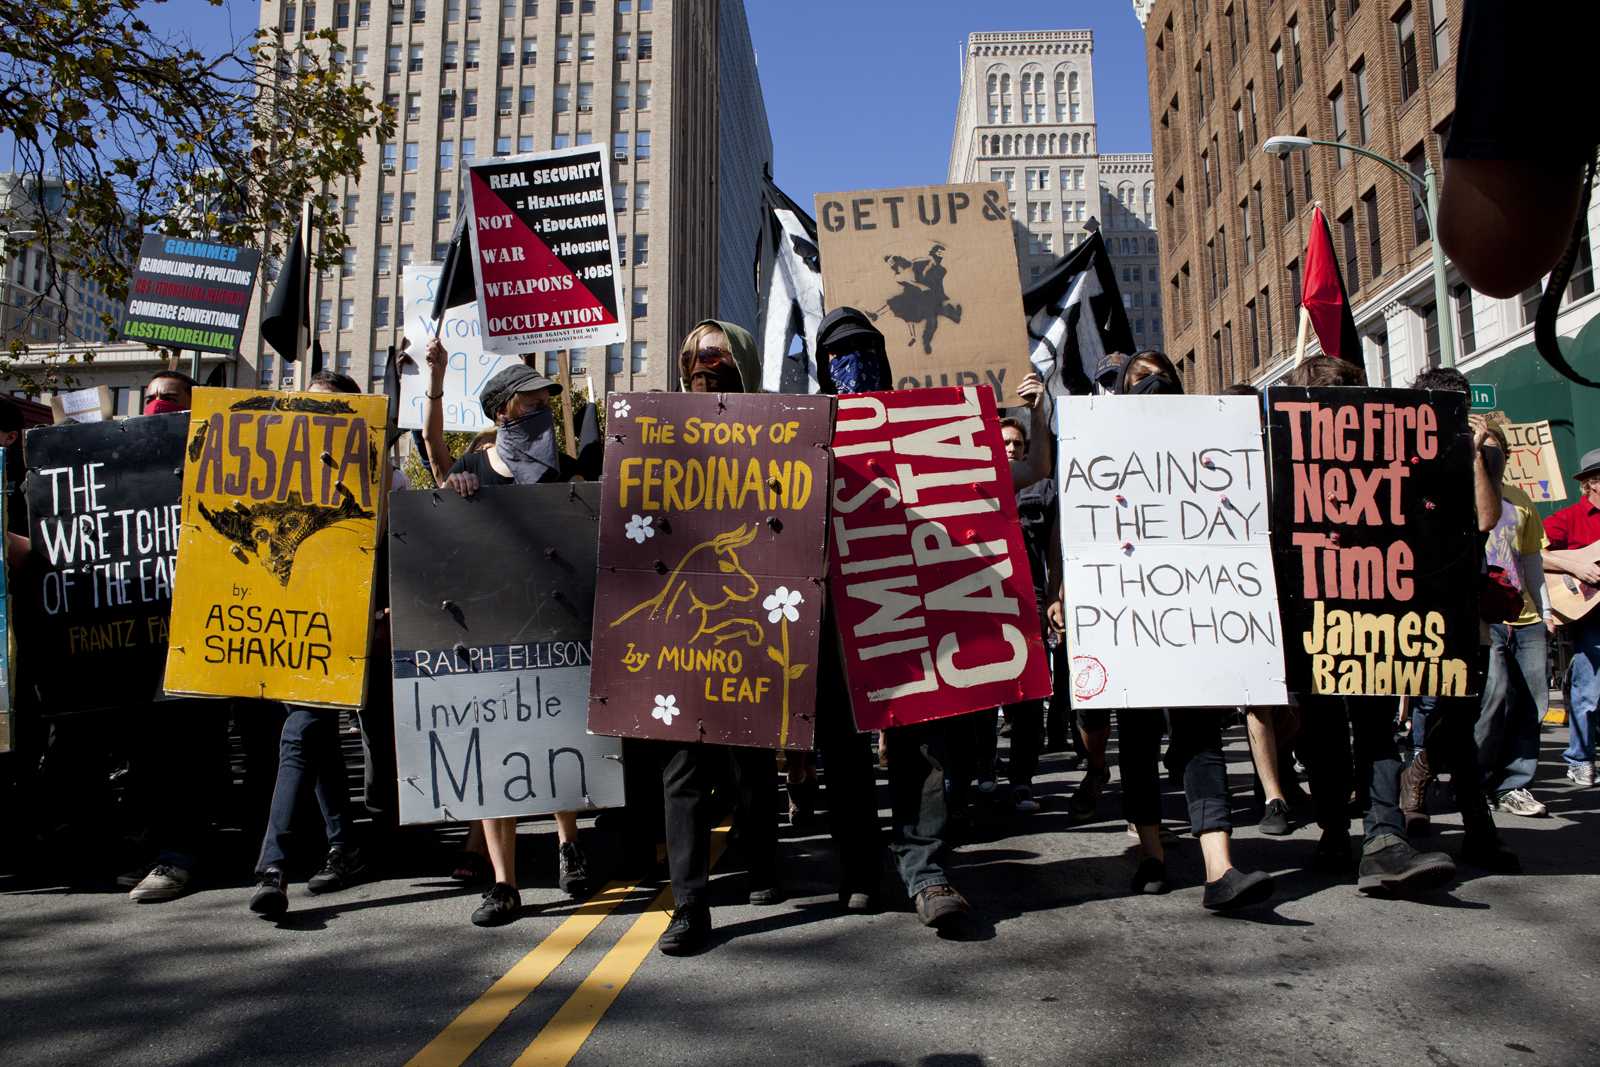 Occupy Oakland protesters march through downtown streets, tent city